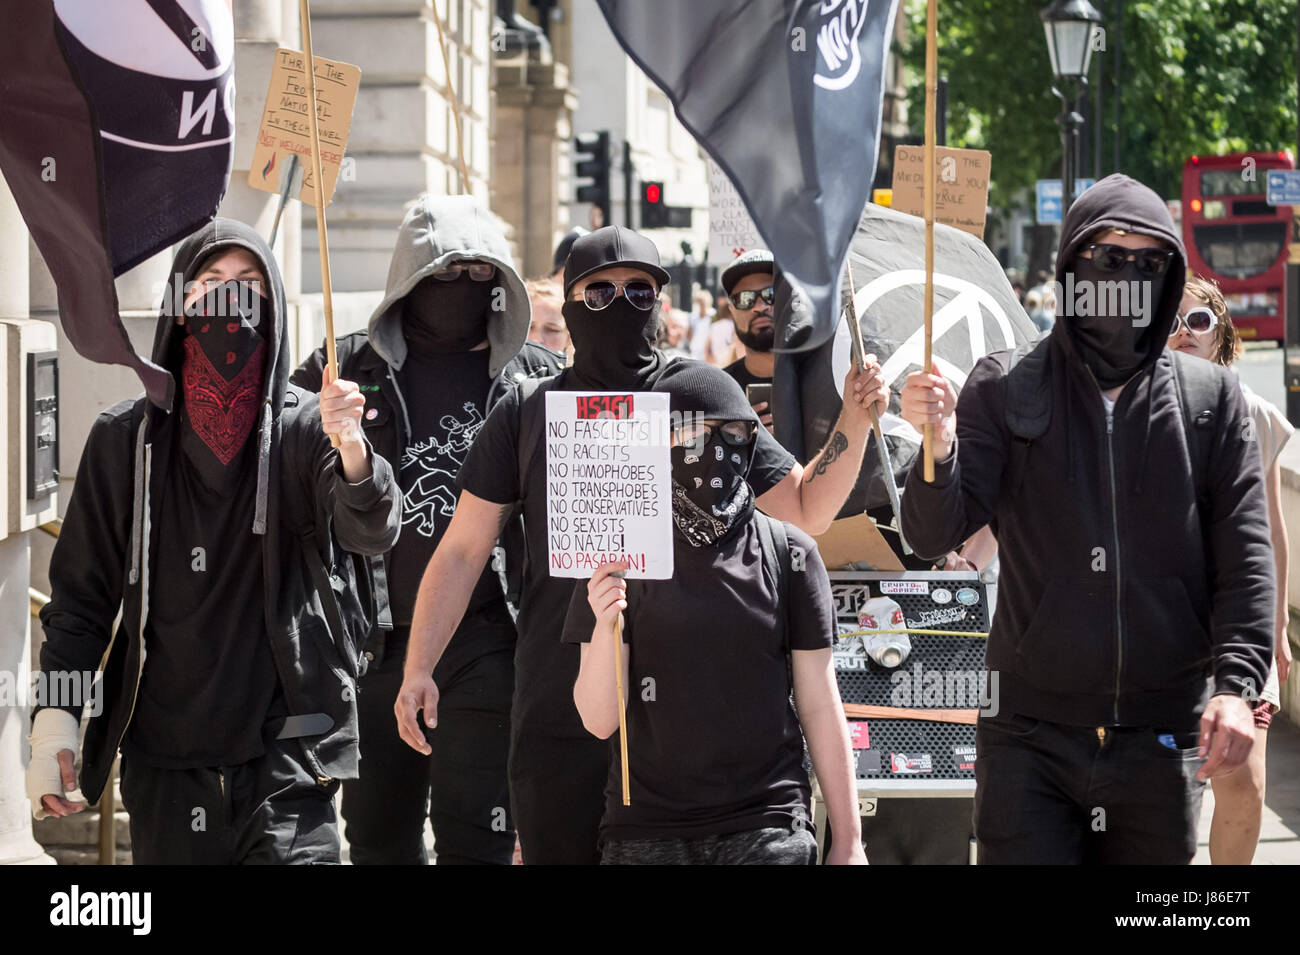 London, UK. 27th May, 2017. A small group of anti-fascists and anarchists march through Whitehall as part of an anti-Tory party protest prior to the upcoming general election. © Guy Corbishley/Alamy Live News Stock Photo